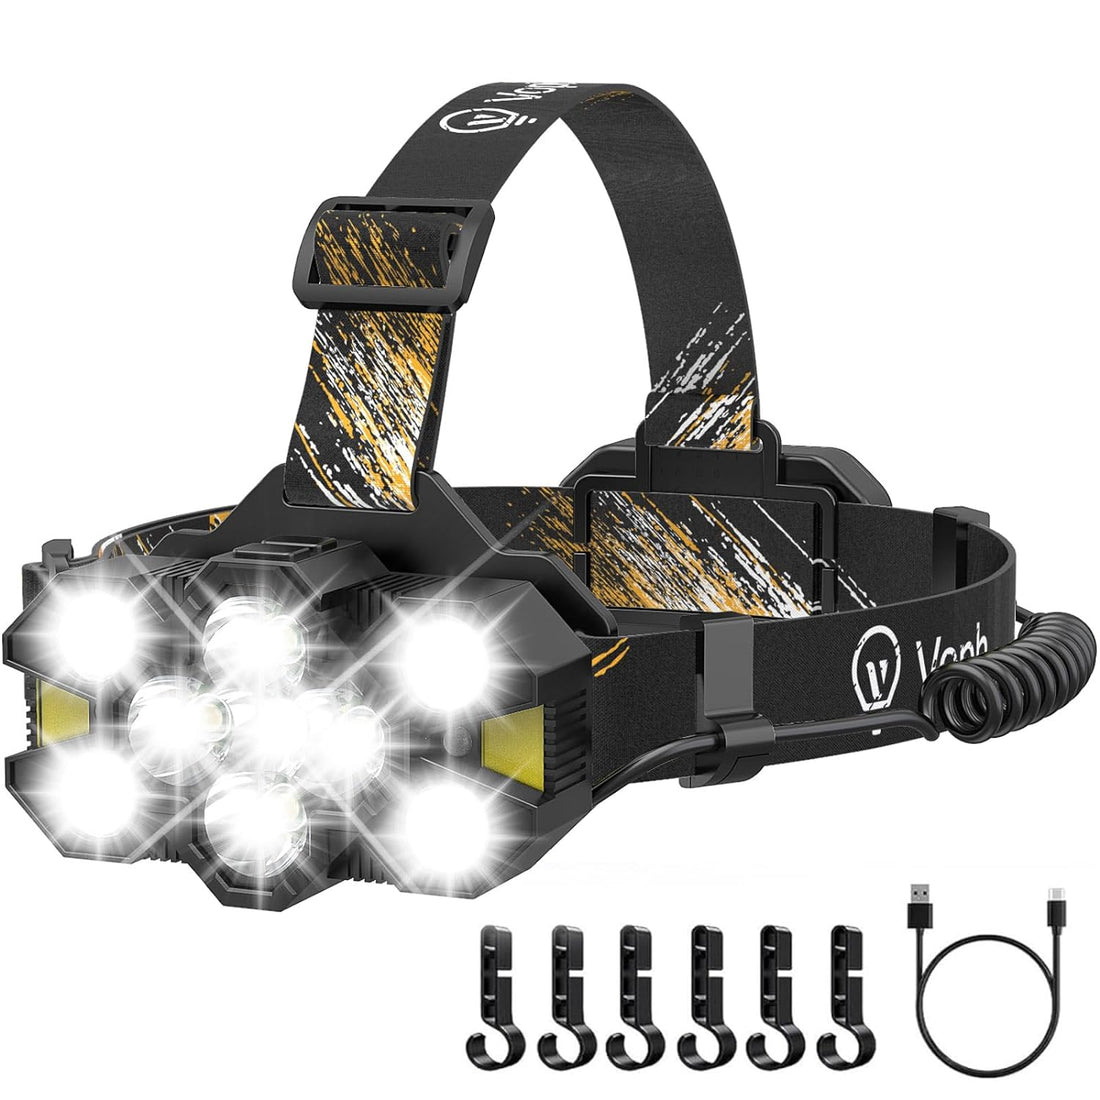 Voph Rechargeable Headlamp, 11 LEDs Super Bright High Lumens LED Head Lamp